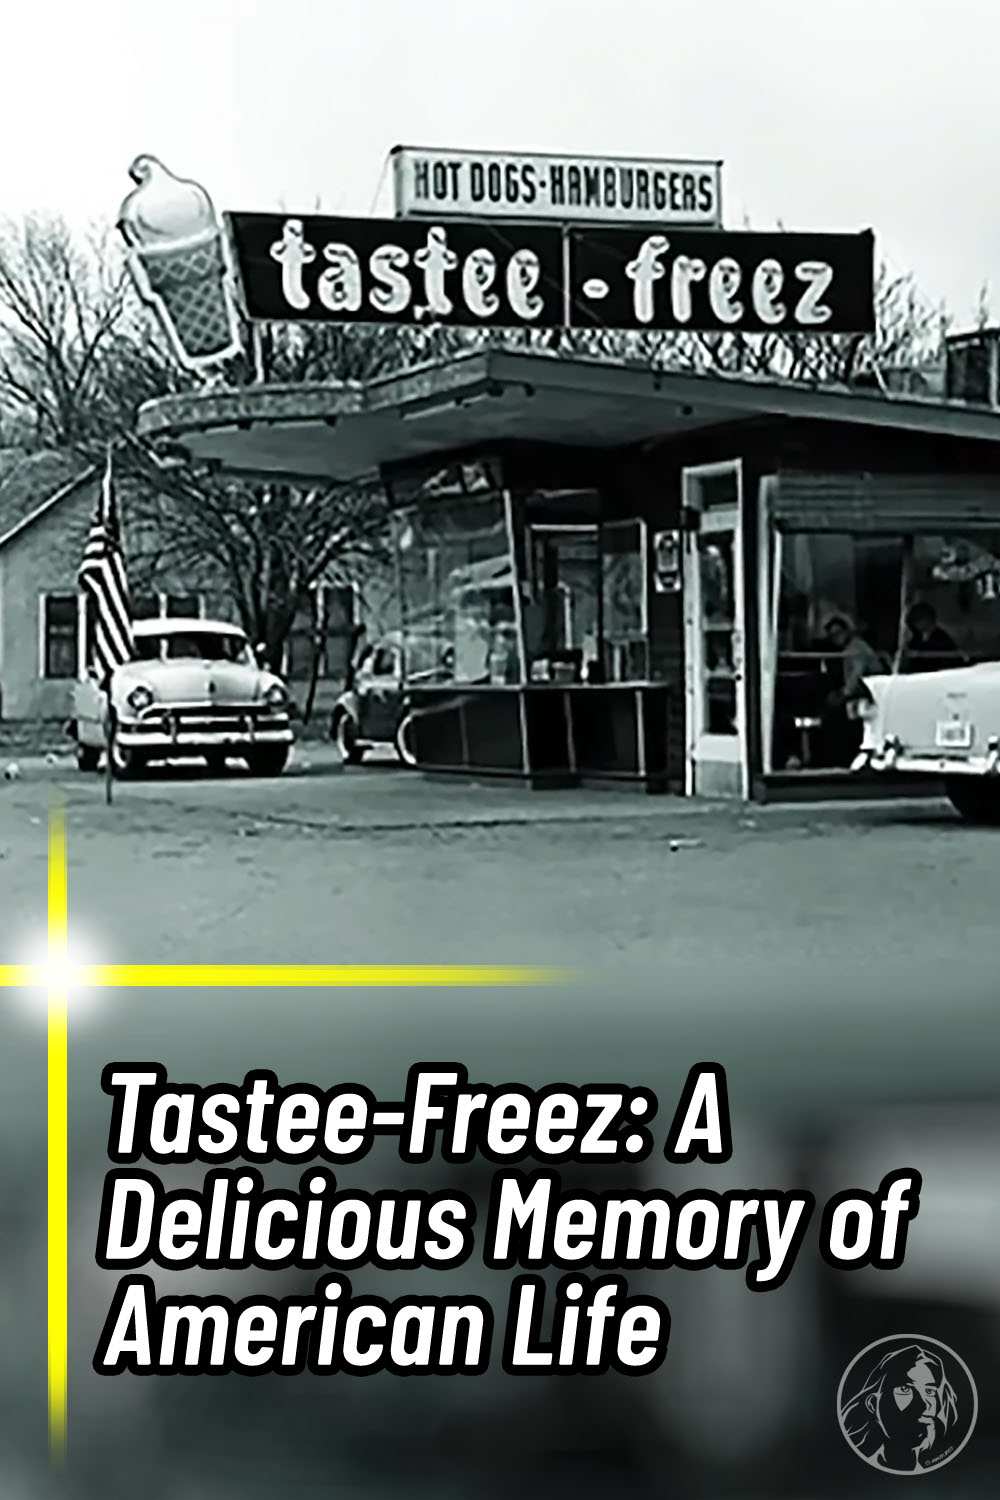 Tastee-Freez: A Delicious Memory of American Life